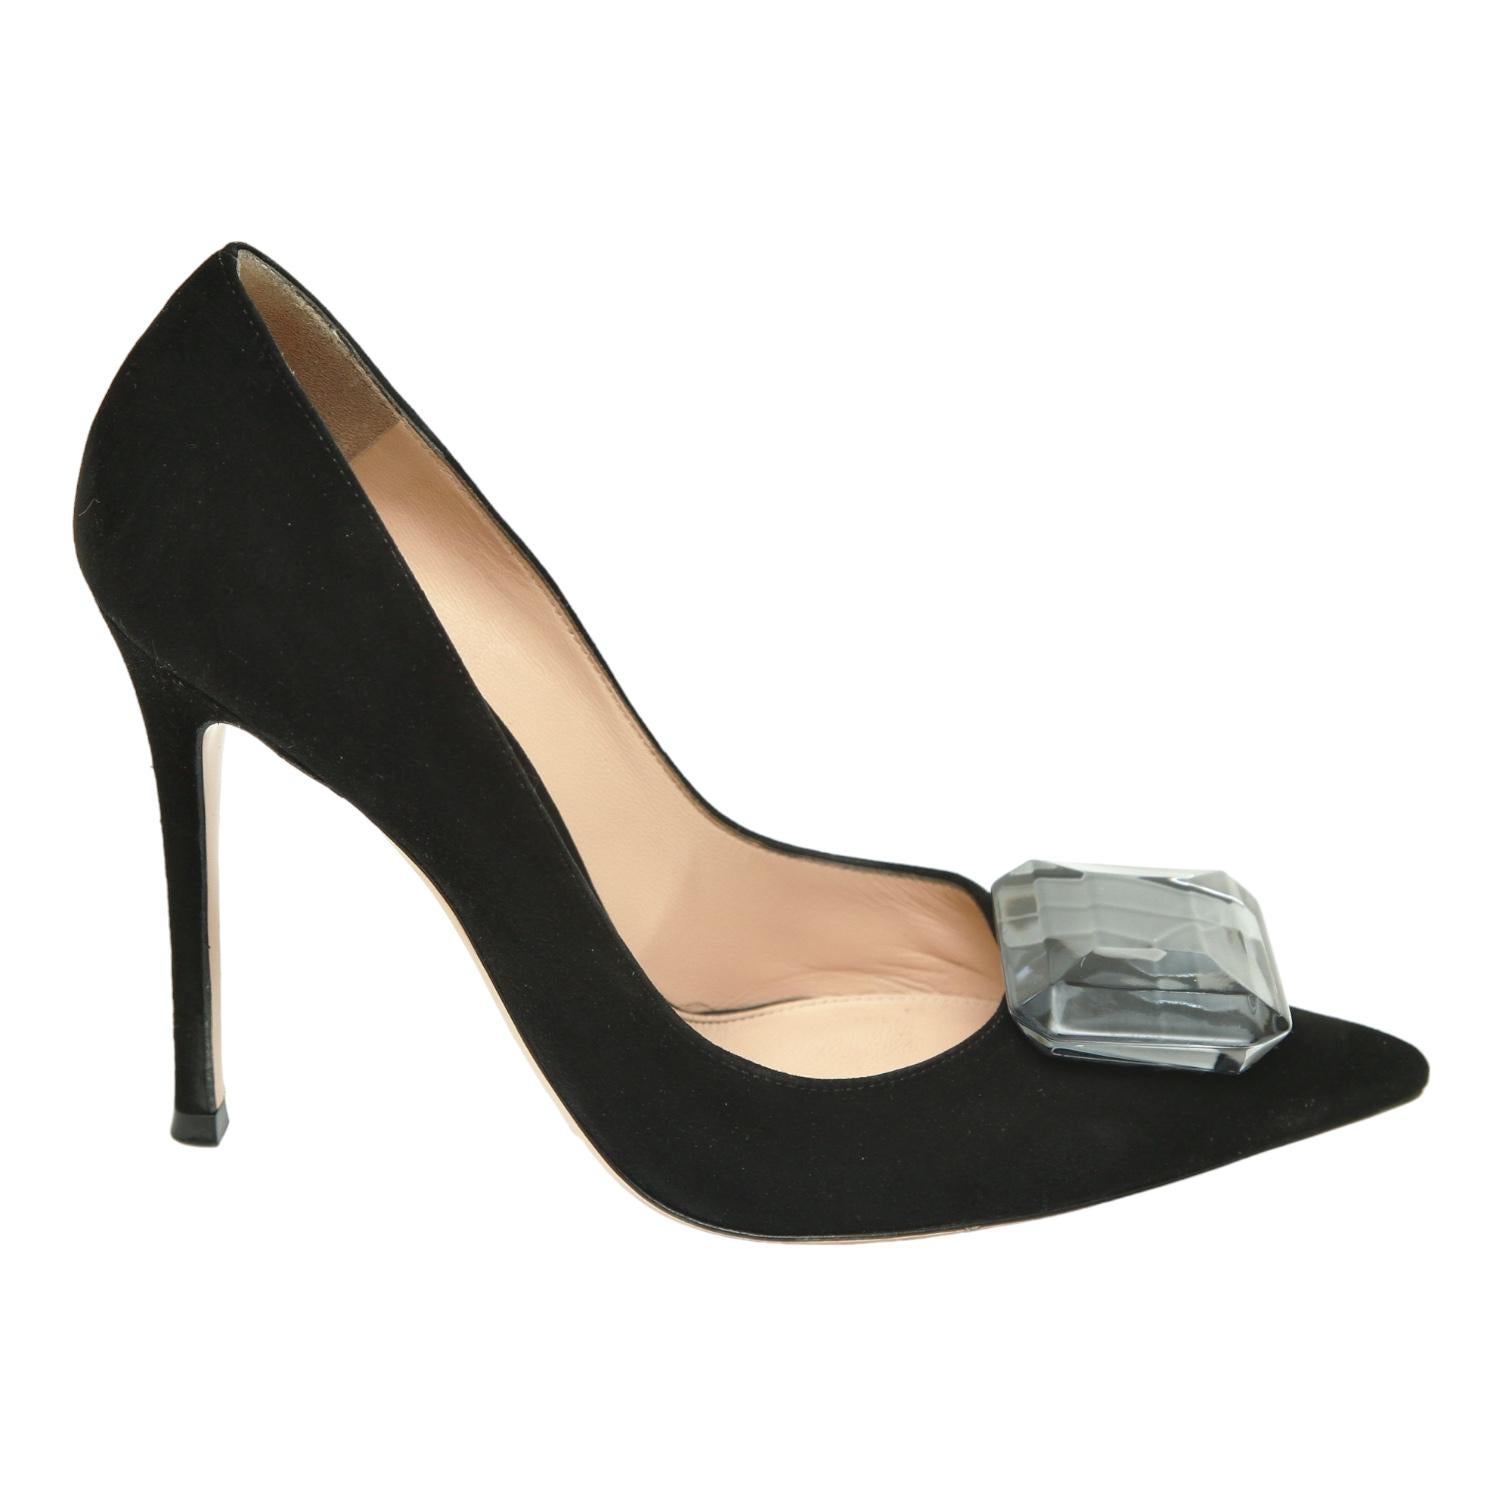 GUARANTEED AUTHENTIC GIANVITO ROSSI JAIPUR EMBELLISHED SUEDE PUMPS

Retail excluding sales taxes $1,200

Design:
- Black suede upper.
- Oversized crystal embellishment.
- Self-covered heel.
- Leather lining and sole.
- Comes with dust bag.

Size: